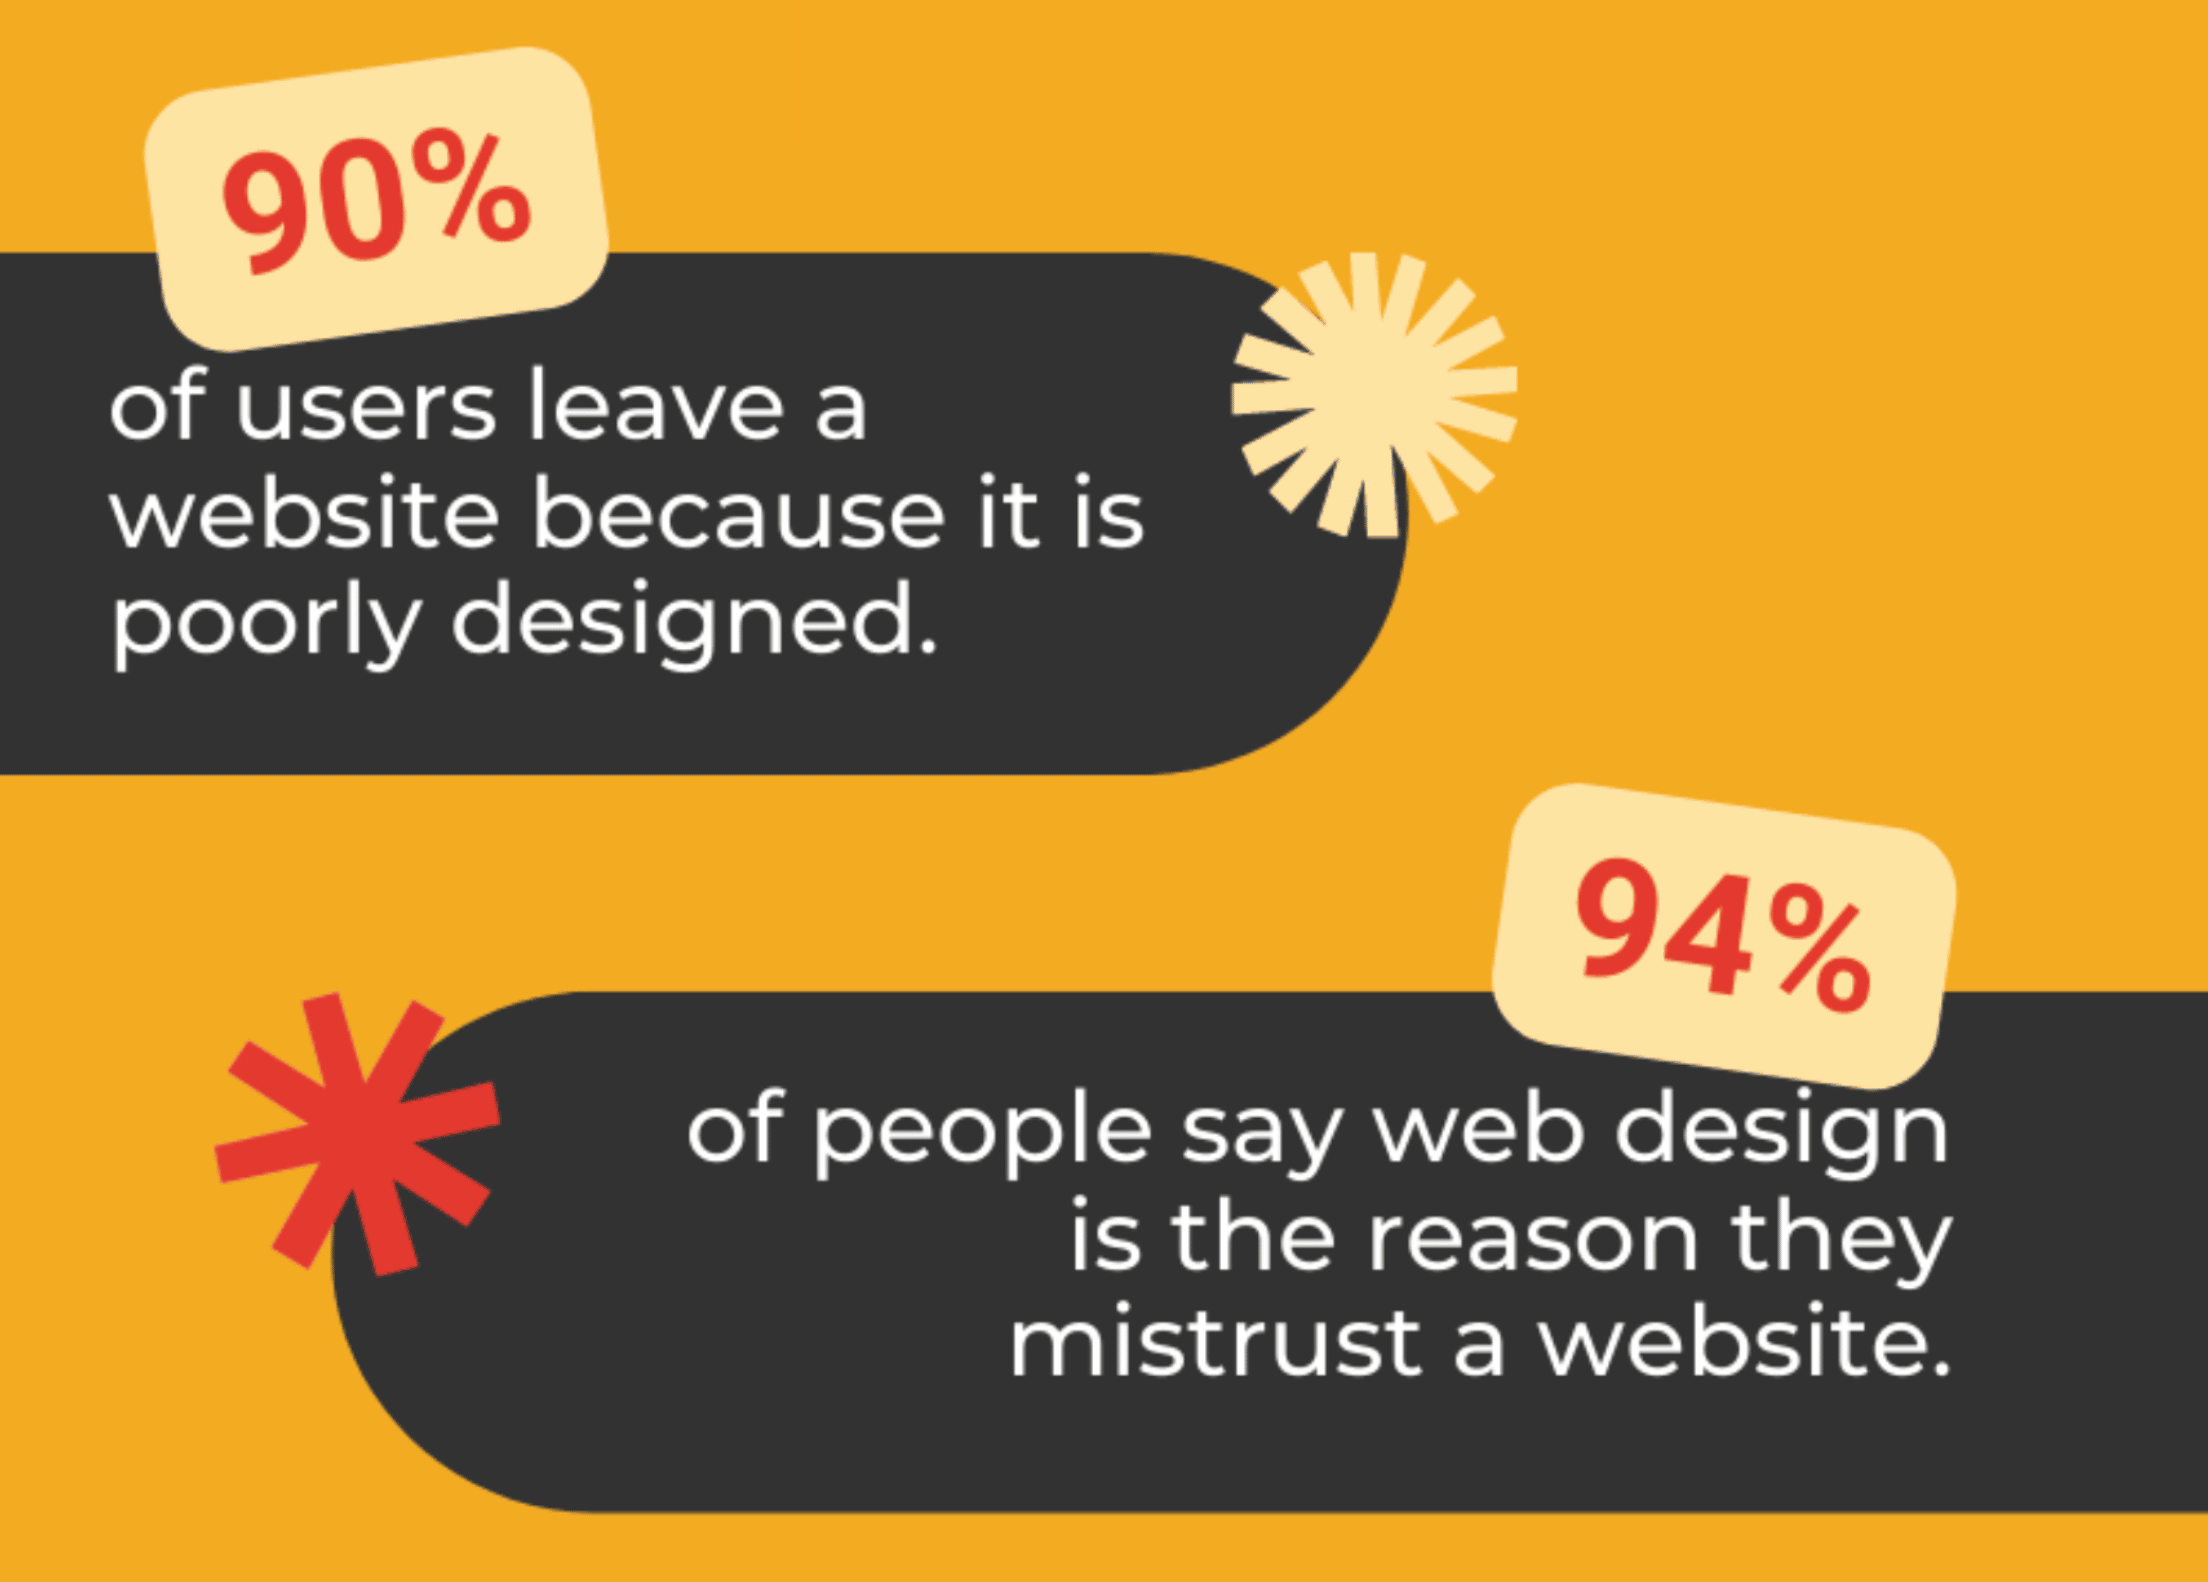 image shows that 90% of users leave a website because it’s poorly designed and 94% of people say website design is the reason they mistrust a website